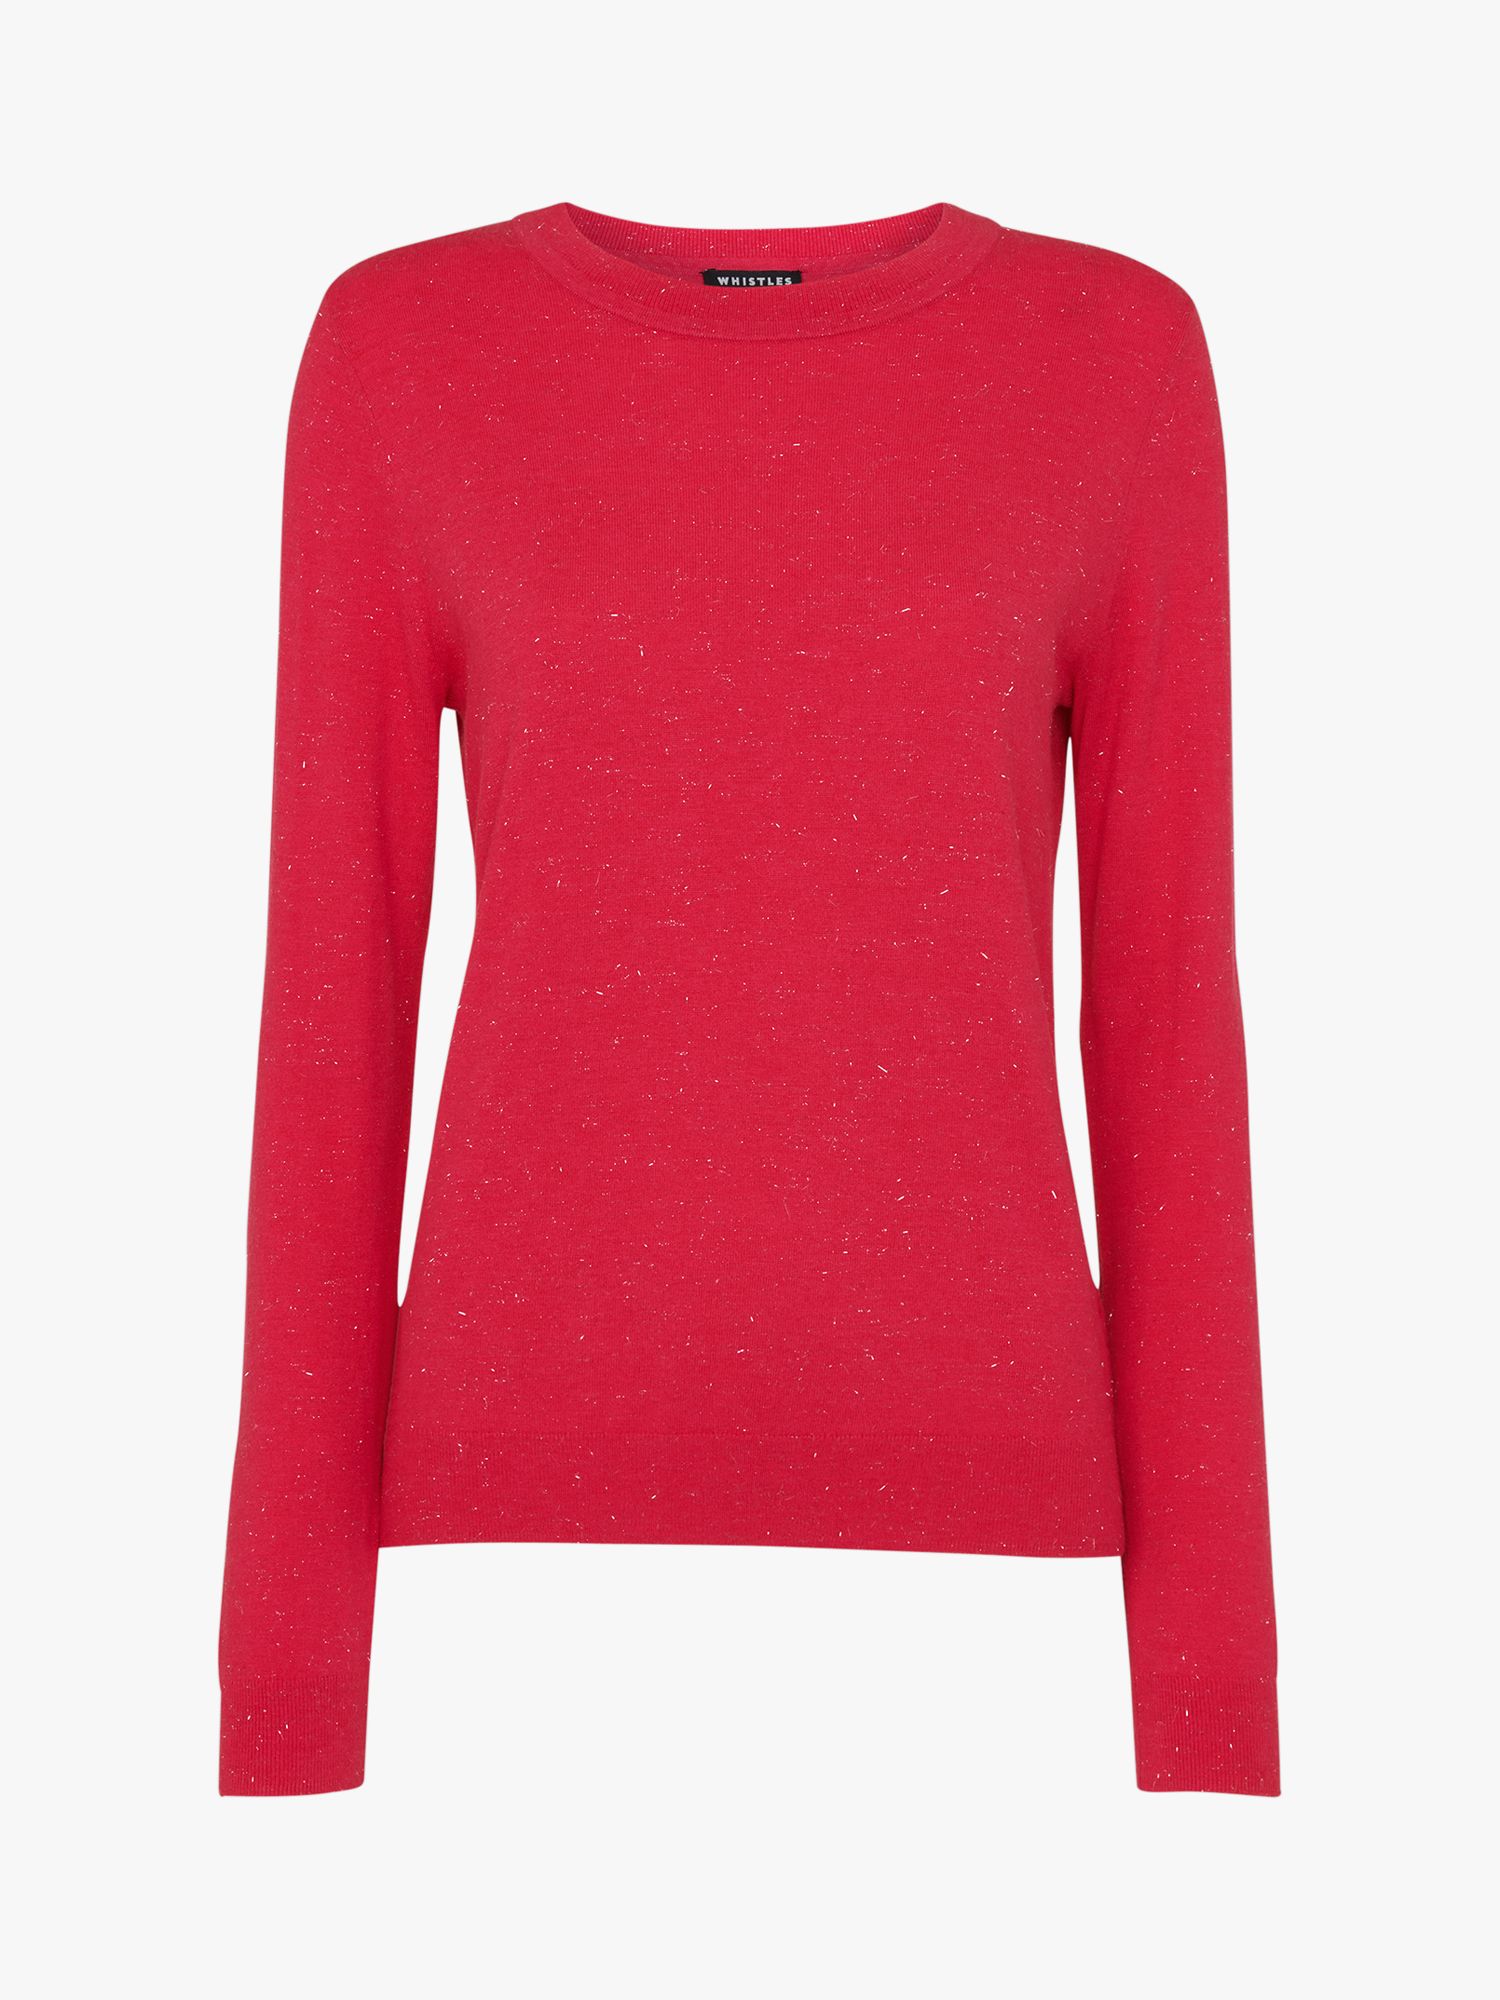 Whistles Annie Sparkle Crew Neck Jumper, Pink at John Lewis & Partners